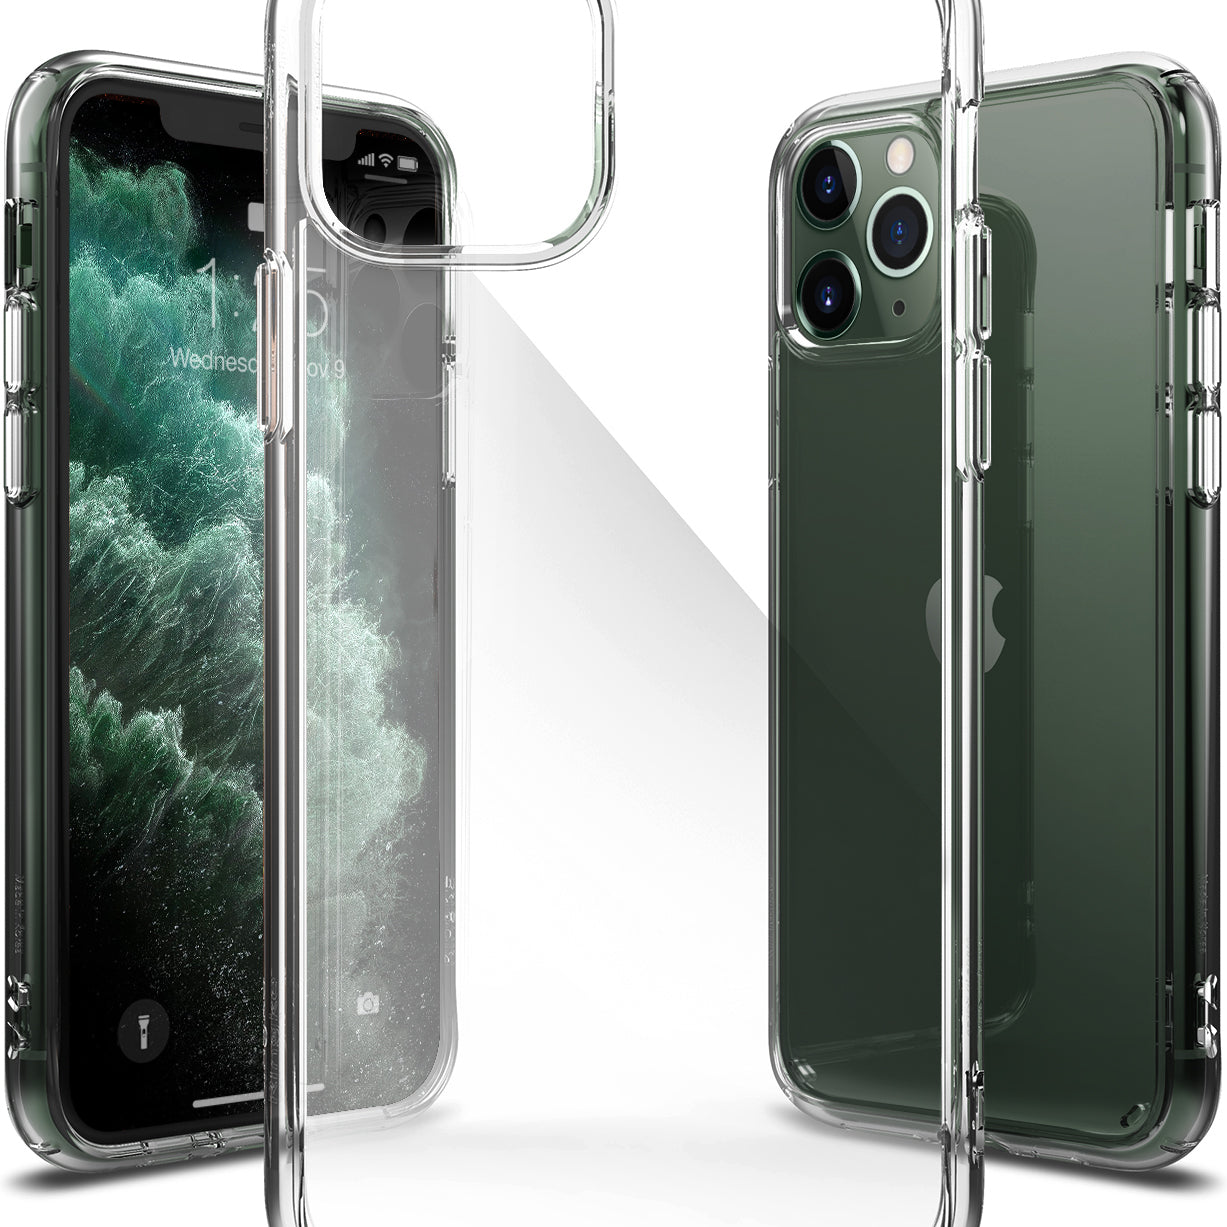 Ringke Fusion designed for iPhone 11 Pro Max Case iPhone XI Pro Max Case Cover 2019 clear